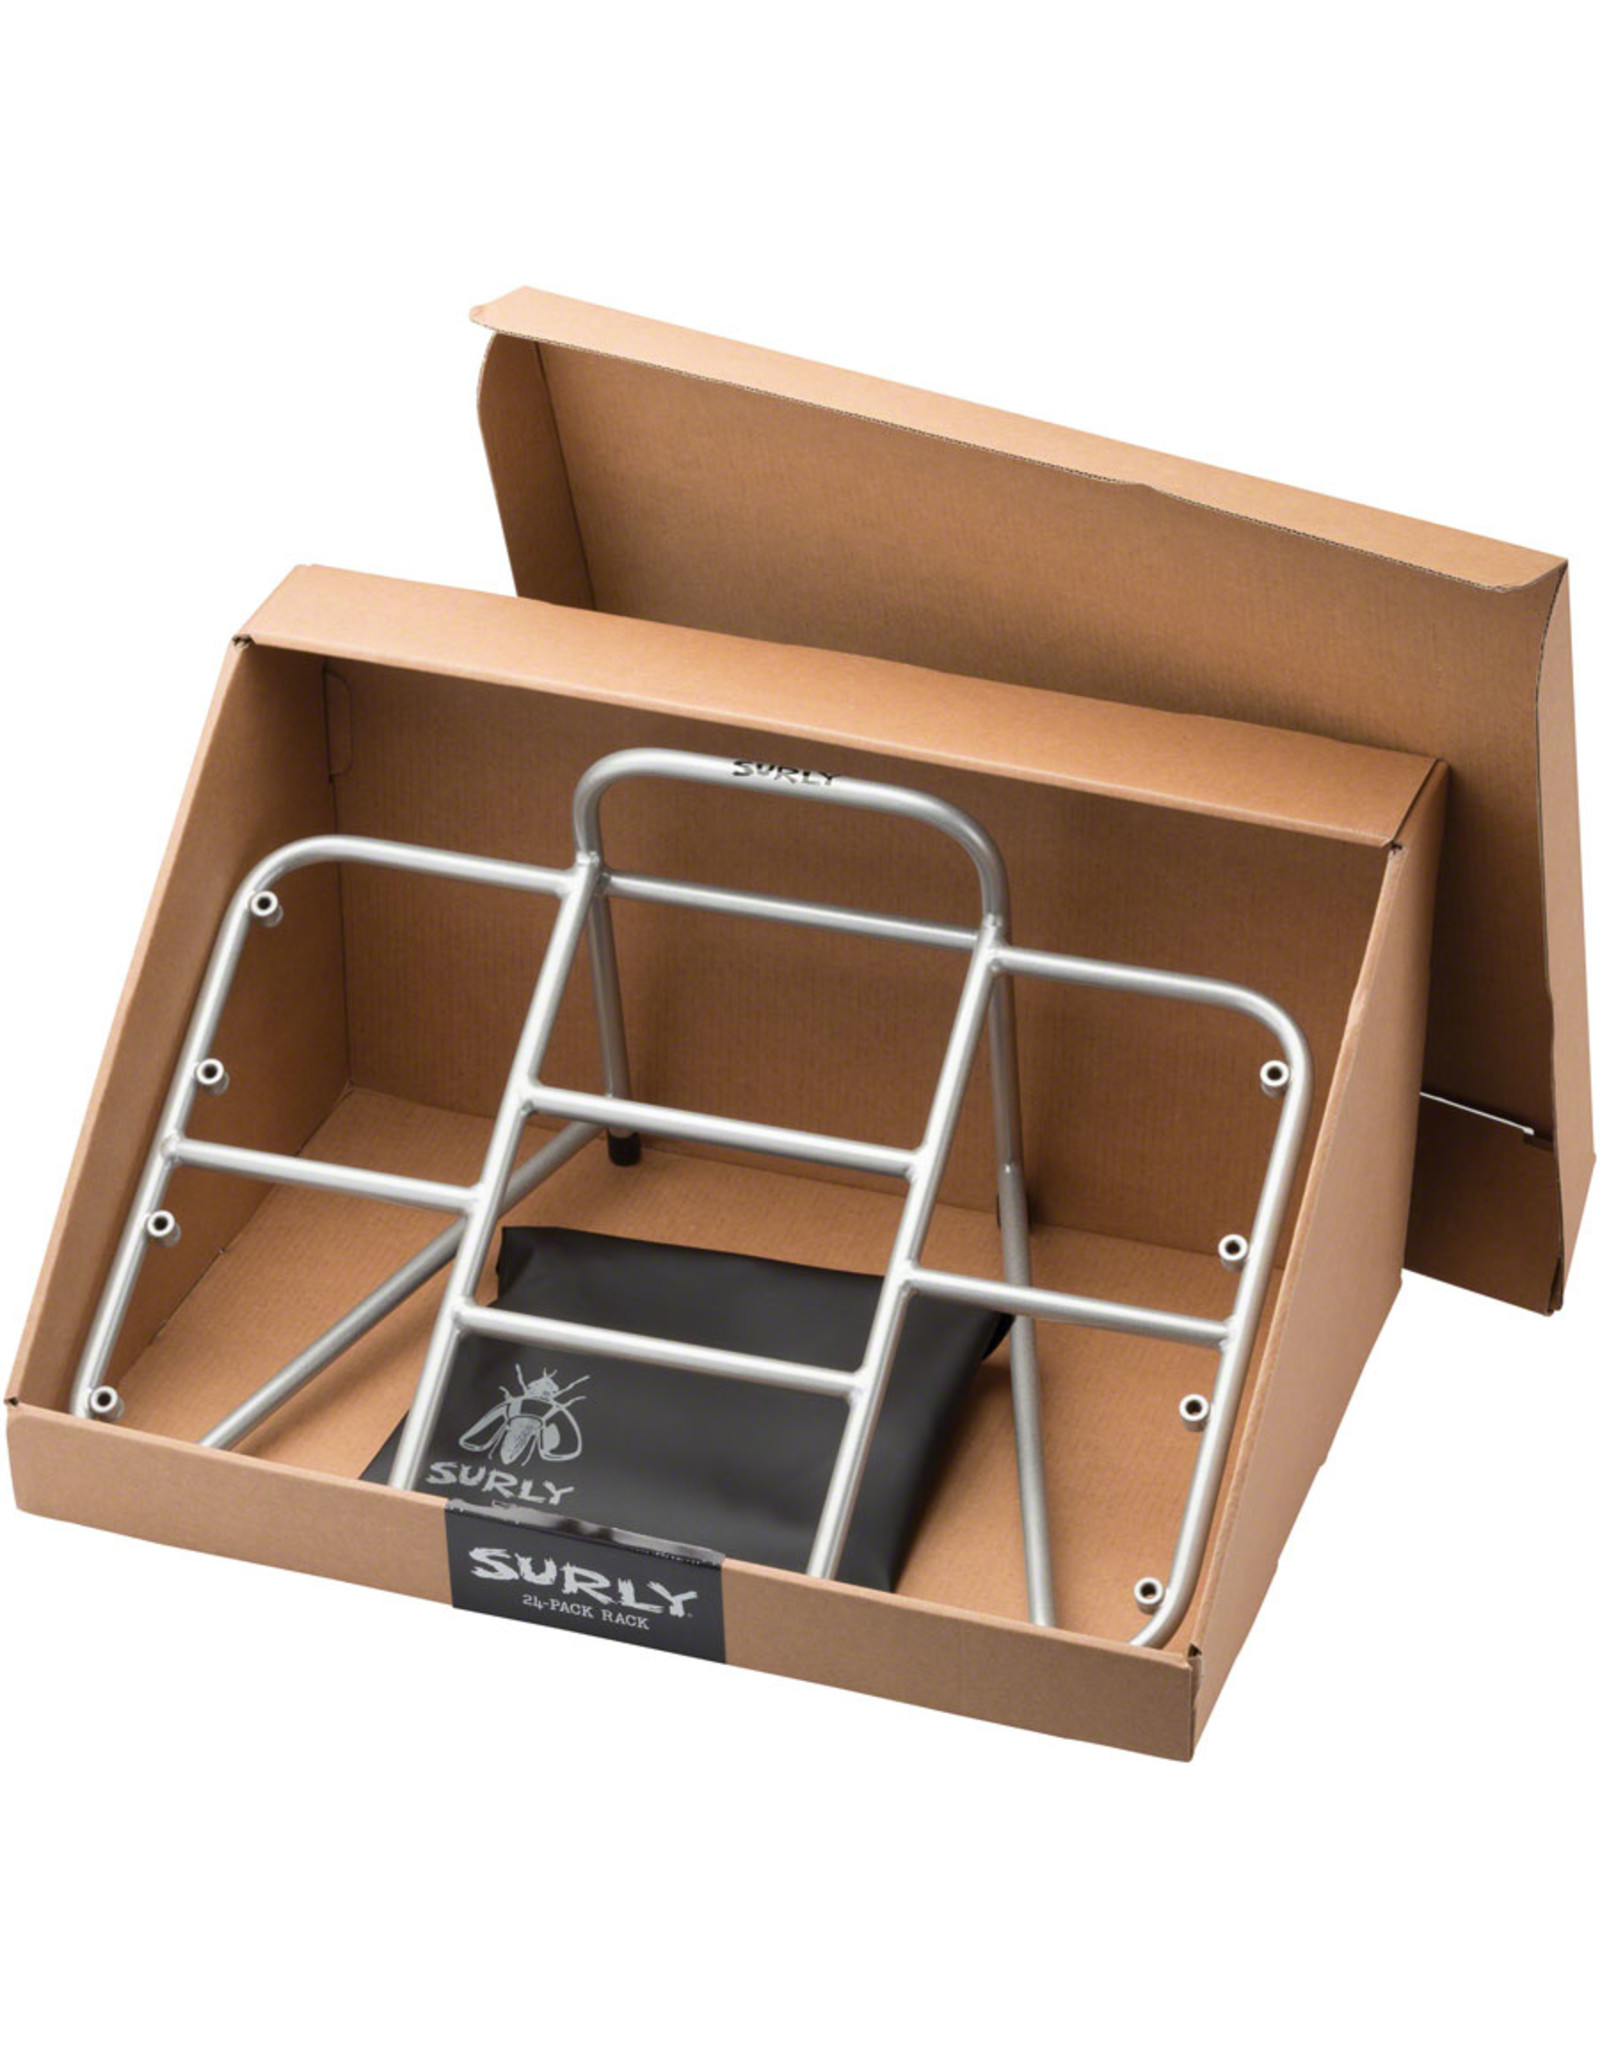 Surly Surly 24-pack Rack Silver